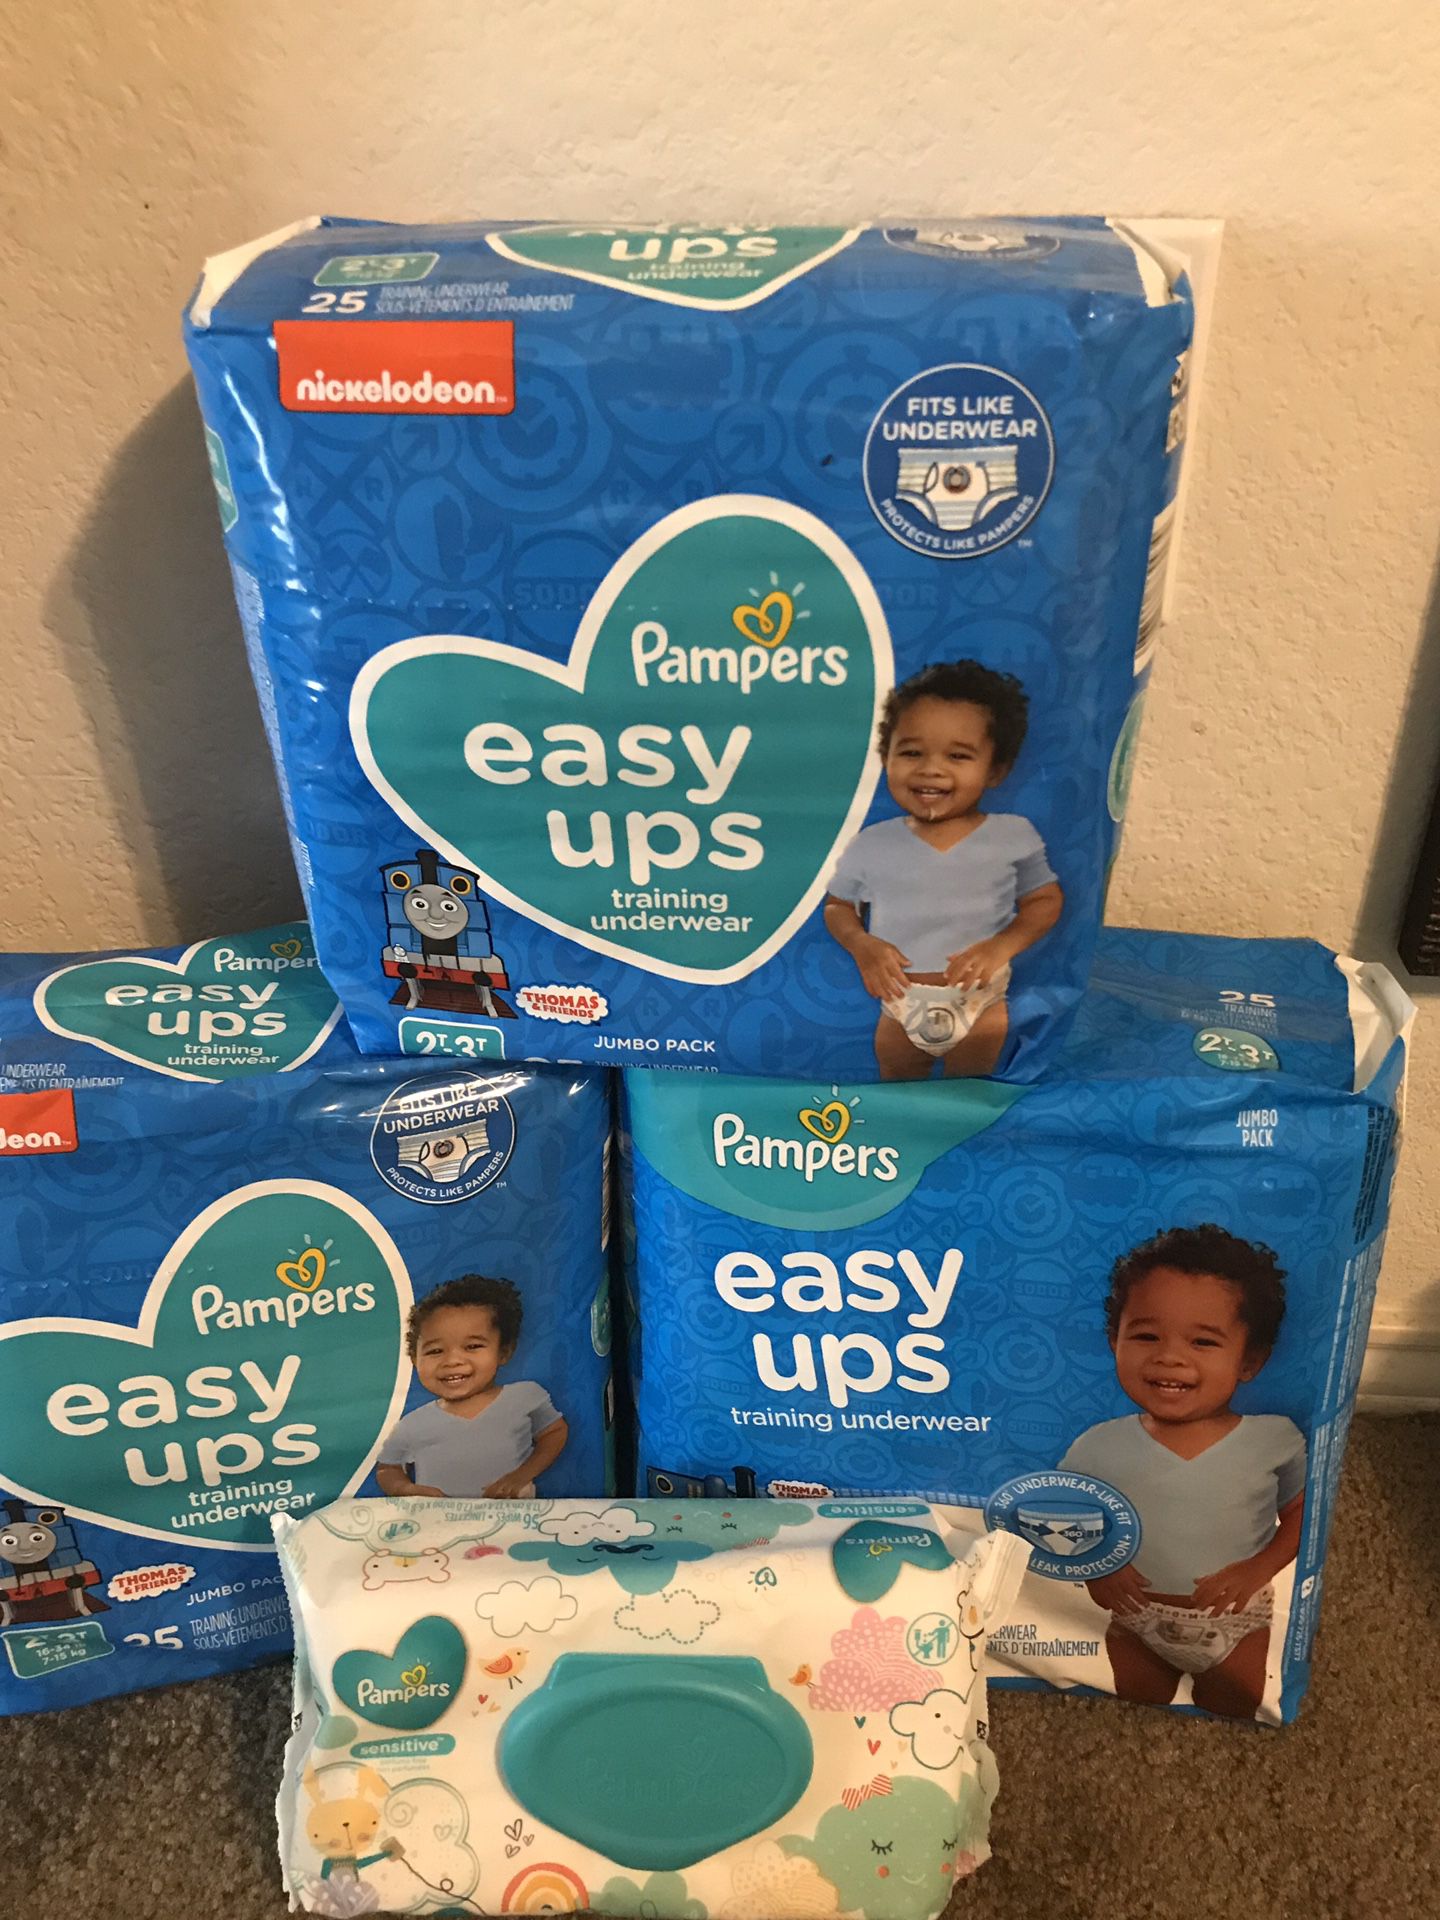 Pampers Easy UPS size 2T-4T and pack of Pampers wipes